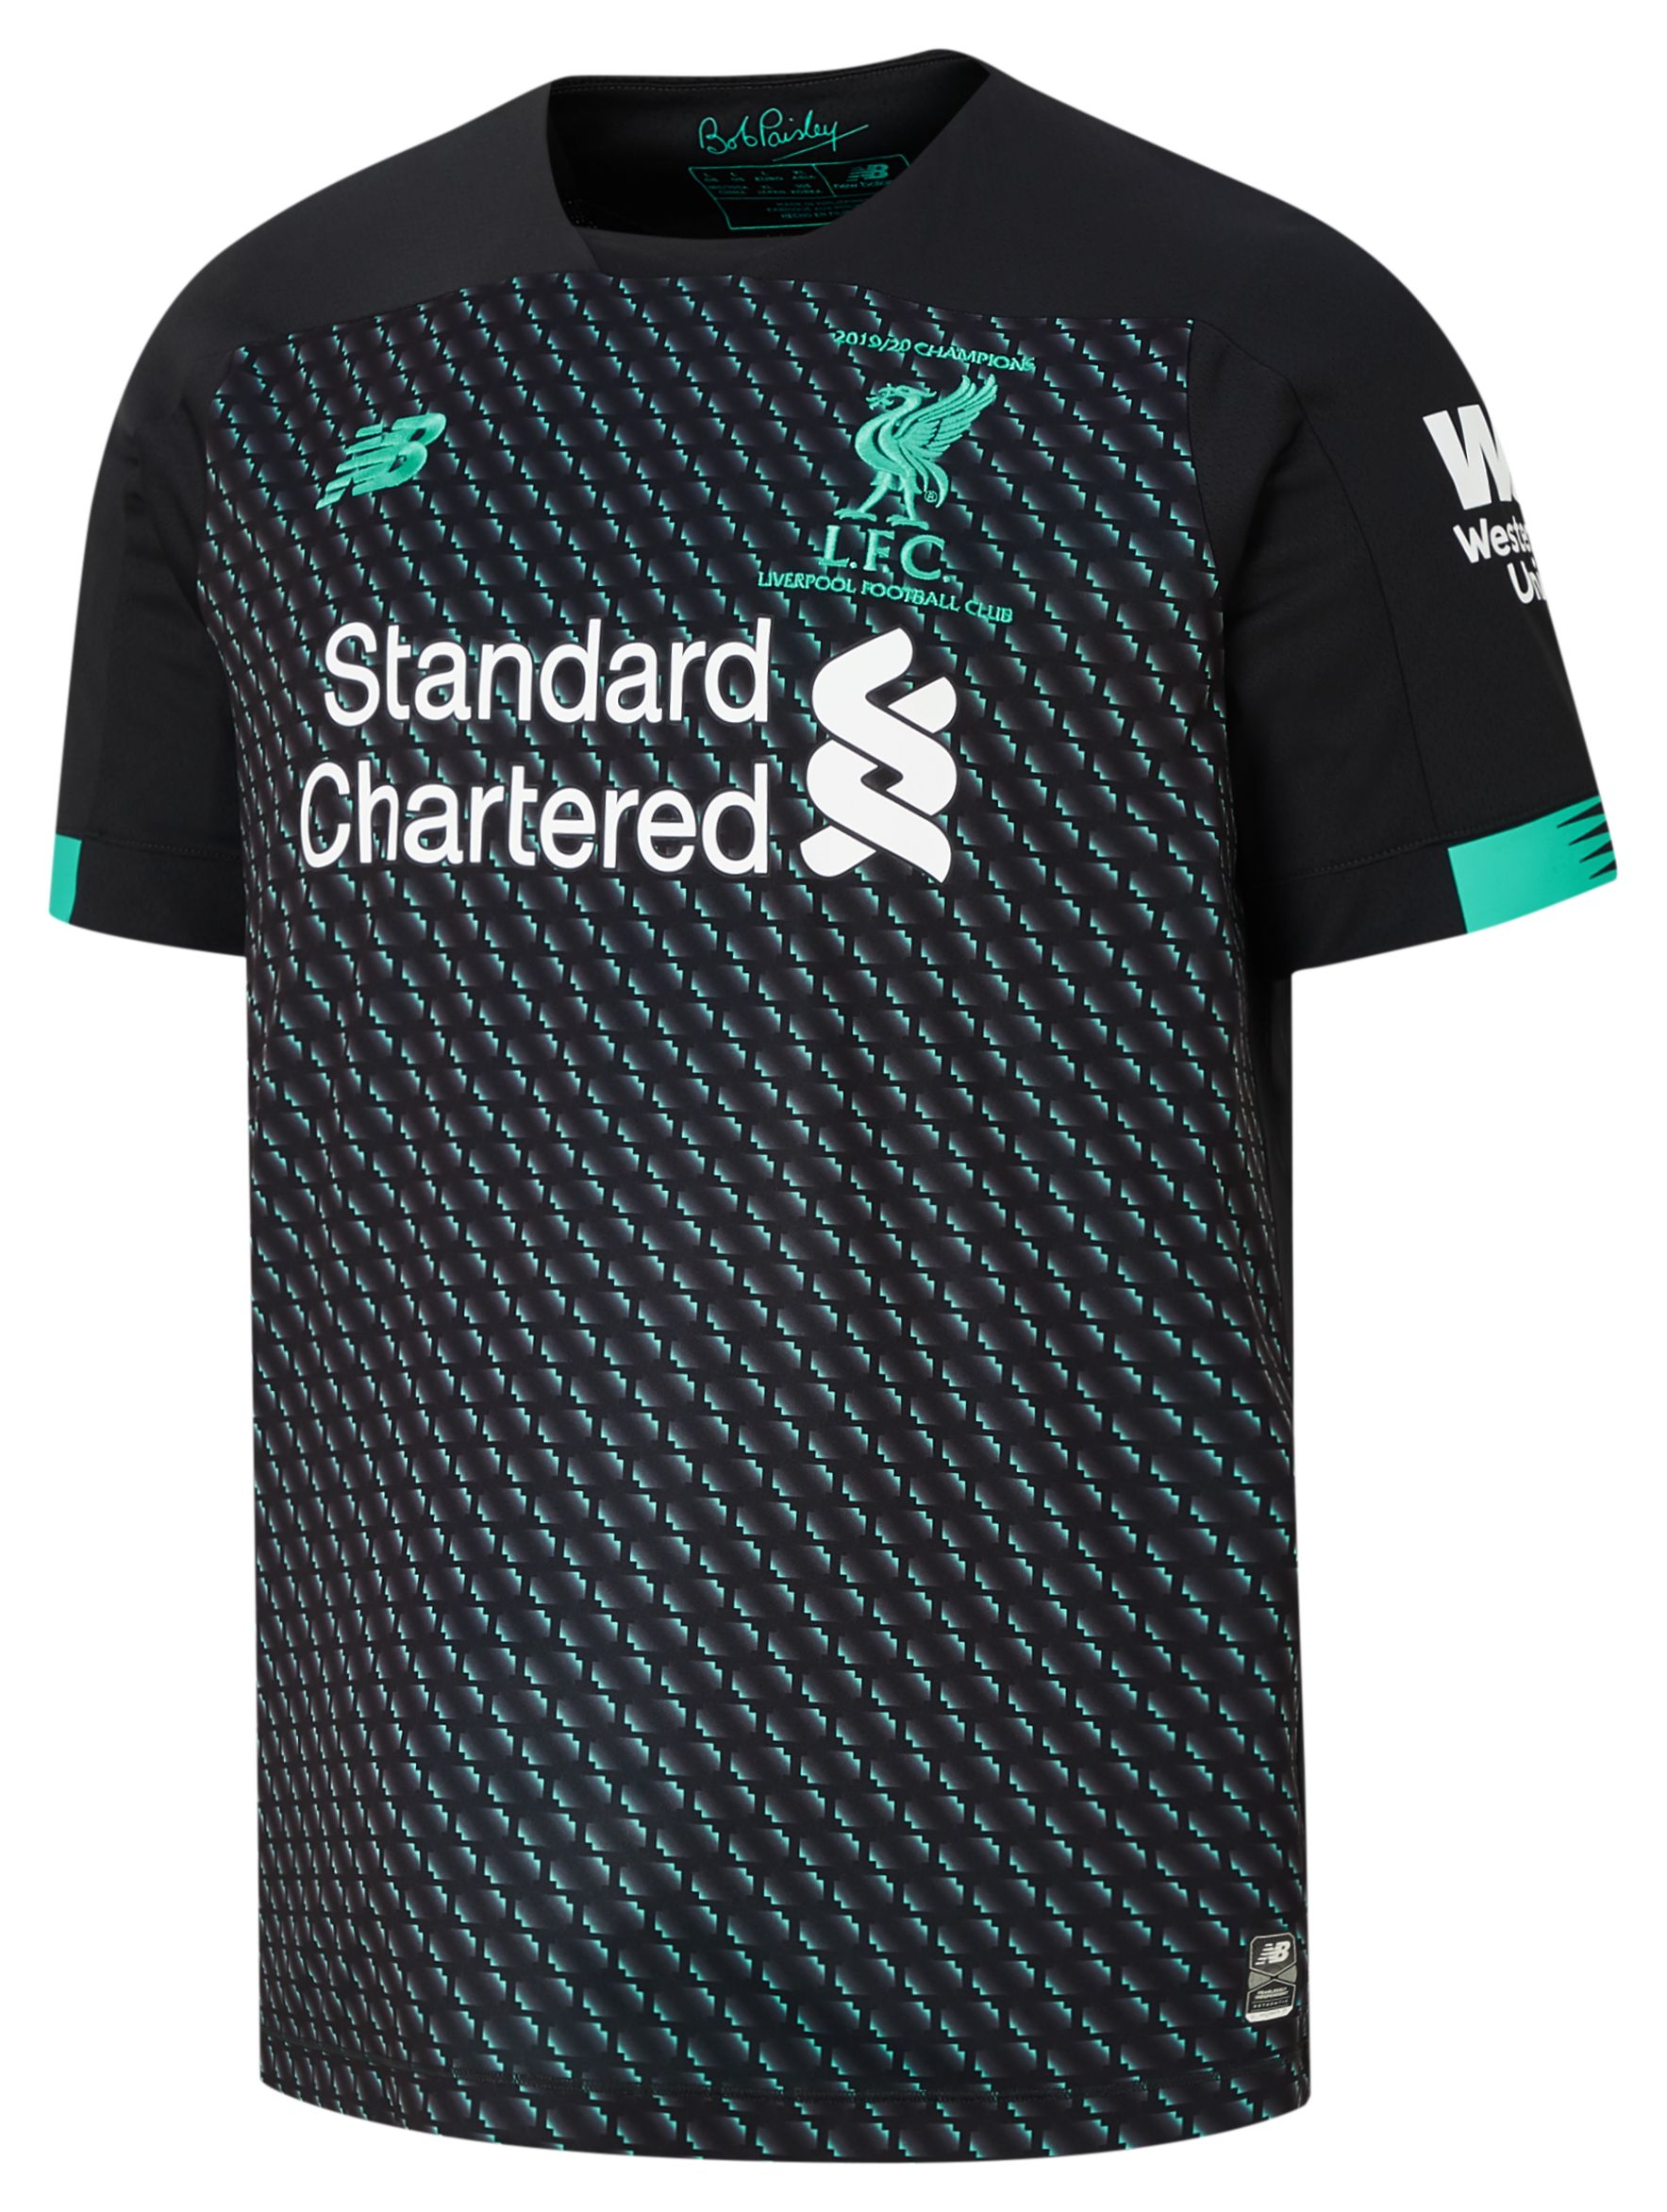 liverpool white jersey